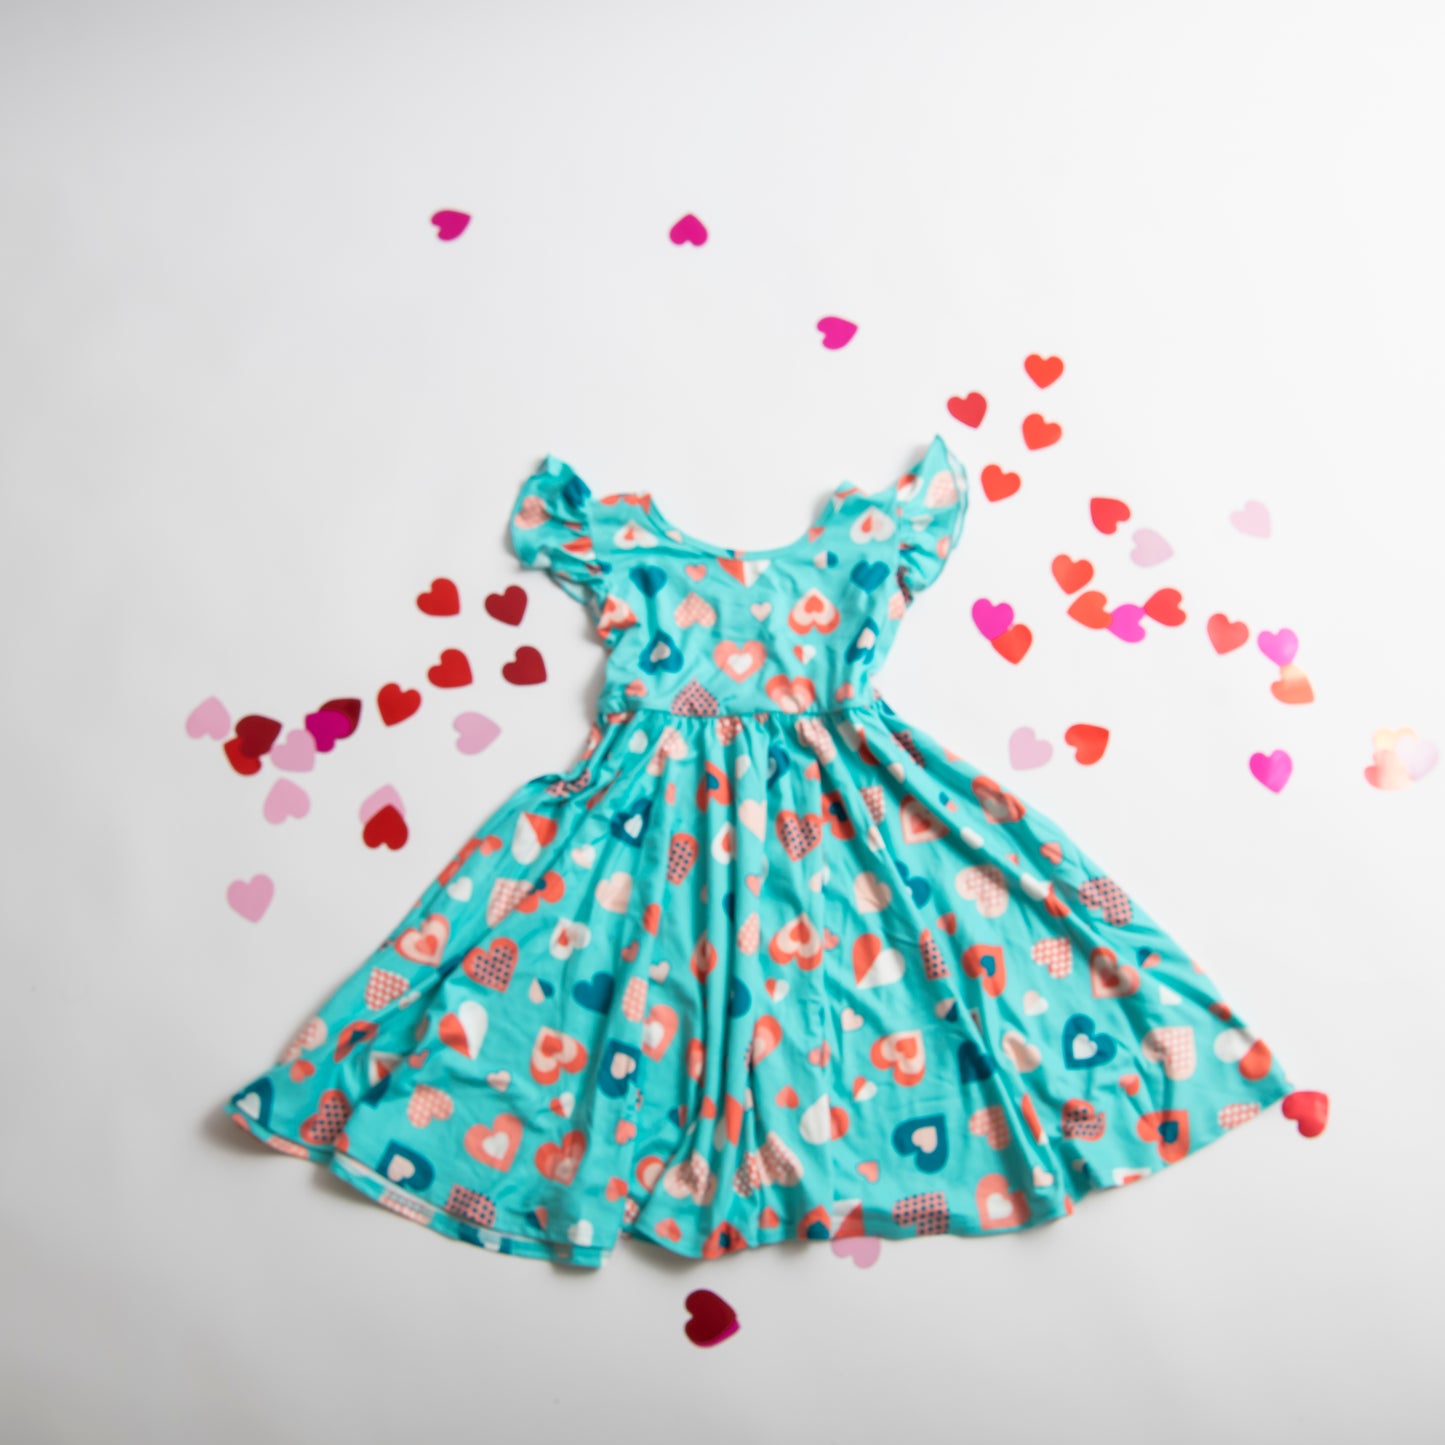 Teal Twirl Dress with Hearts